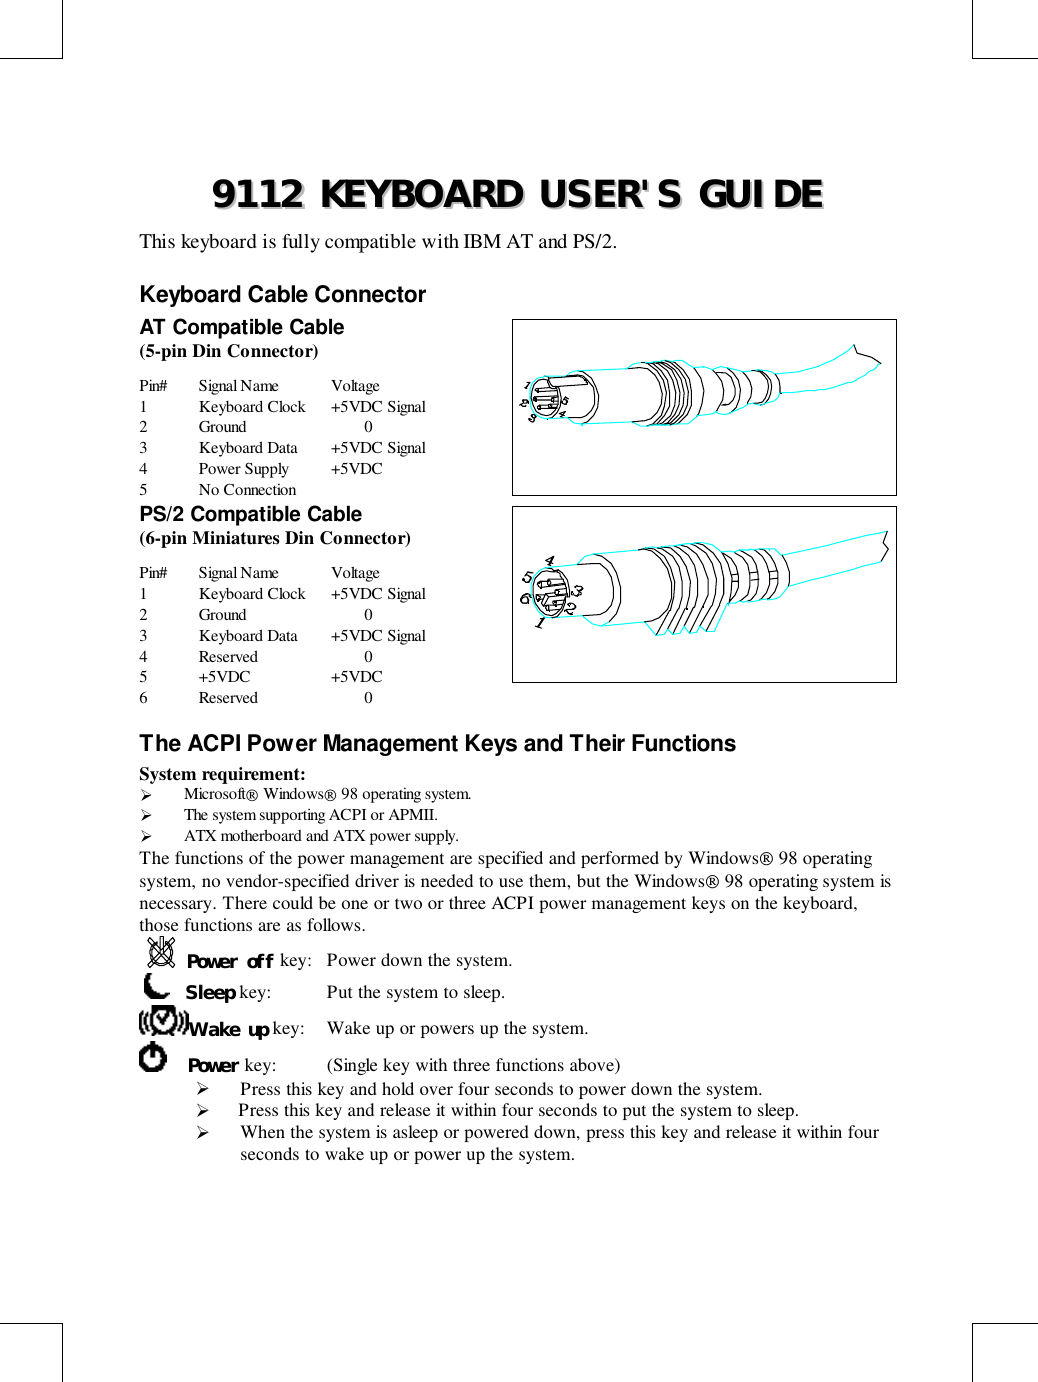 99111122  KKEEYYBBOOAARRDD  UUSSEERR&apos;&apos;SS  GGUUIIDDEEThis keyboard is fully compatible with IBM AT and PS/2.Keyboard Cable ConnectorAT Compatible Cable(5-pin Din Connector)Pin# Signal Name Voltage1 Keyboard Clock +5VDC Signal2 Ground 03 Keyboard Data +5VDC Signal4 Power Supply +5VDC5 No ConnectionPS/2 Compatible Cable(6-pin Miniatures Din Connector)Pin# Signal Name Voltage1 Keyboard Clock +5VDC Signal2 Ground 03 Keyboard Data +5VDC Signal4 Reserved 05 +5VDC +5VDC6 Reserved 0The ACPI Power Management Keys and Their FunctionsSystem requirement:! Microsoft Windows 98 operating system.! The system supporting ACPI or APMII.! ATX motherboard and ATX power supply.The functions of the power management are specified and performed by Windows 98 operatingsystem, no vendor-specified driver is needed to use them, but the Windows 98 operating system isnecessary. There could be one or two or three ACPI power management keys on the keyboard,those functions are as follows.Power off key: Power down the system.    Sleep key: Put the system to sleep.Wake up key: Wake up or powers up the system.    Power key: (Single key with three functions above)! Press this key and hold over four seconds to power down the system.!  Press this key and release it within four seconds to put the system to sleep.! When the system is asleep or powered down, press this key and release it within fourseconds to wake up or power up the system.